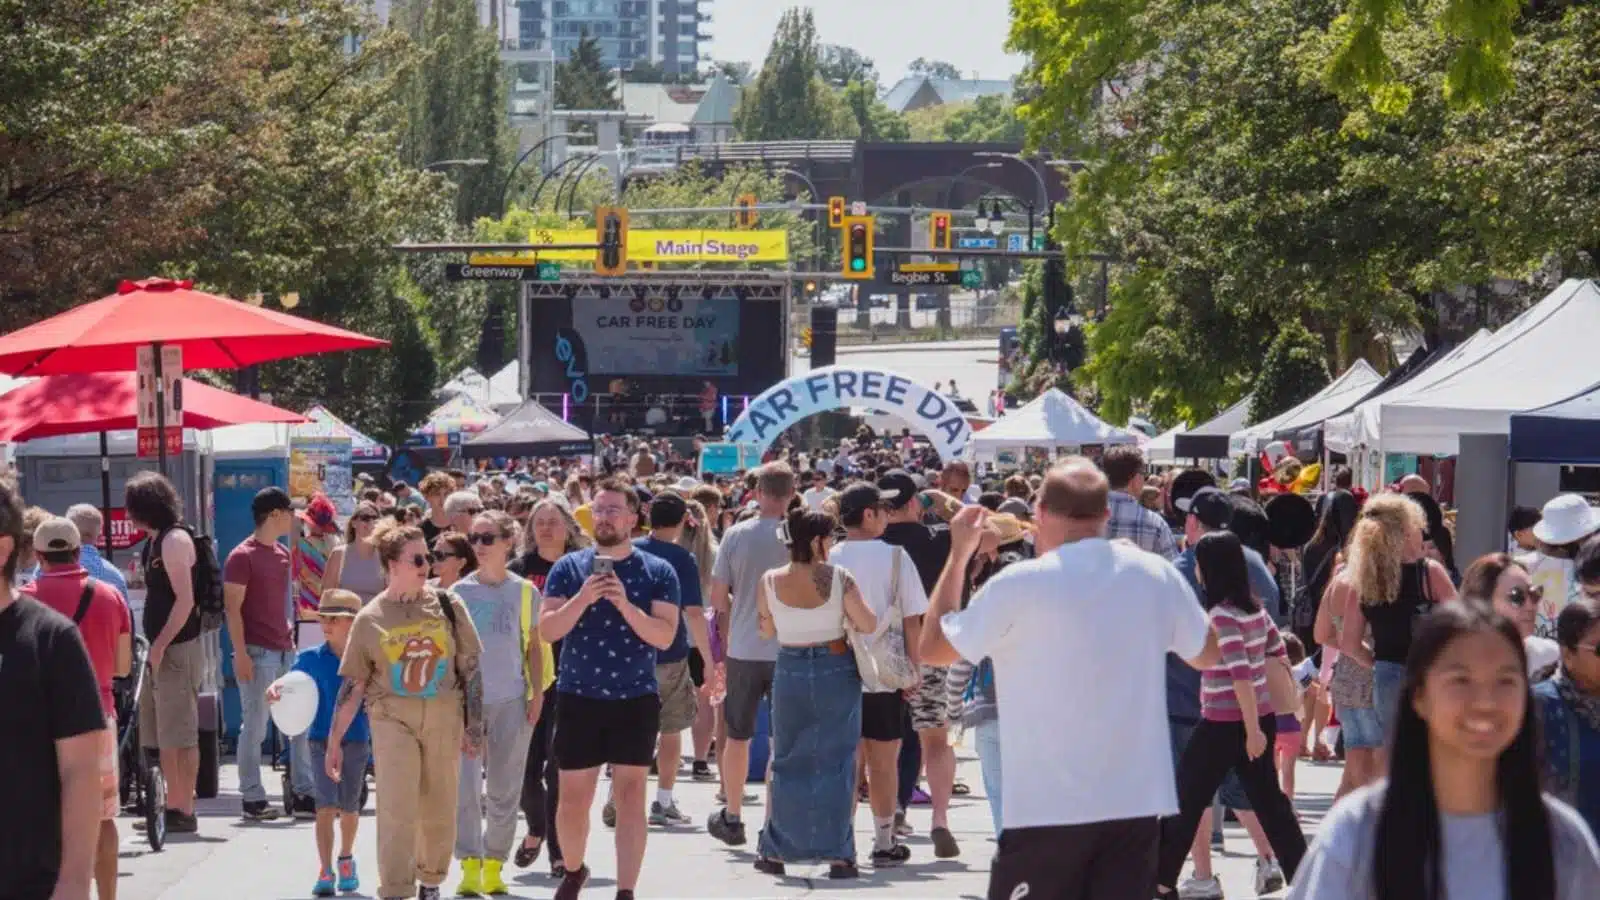 New Westminster, BC Canada - July 29, 2023: Car Free Day street festival.